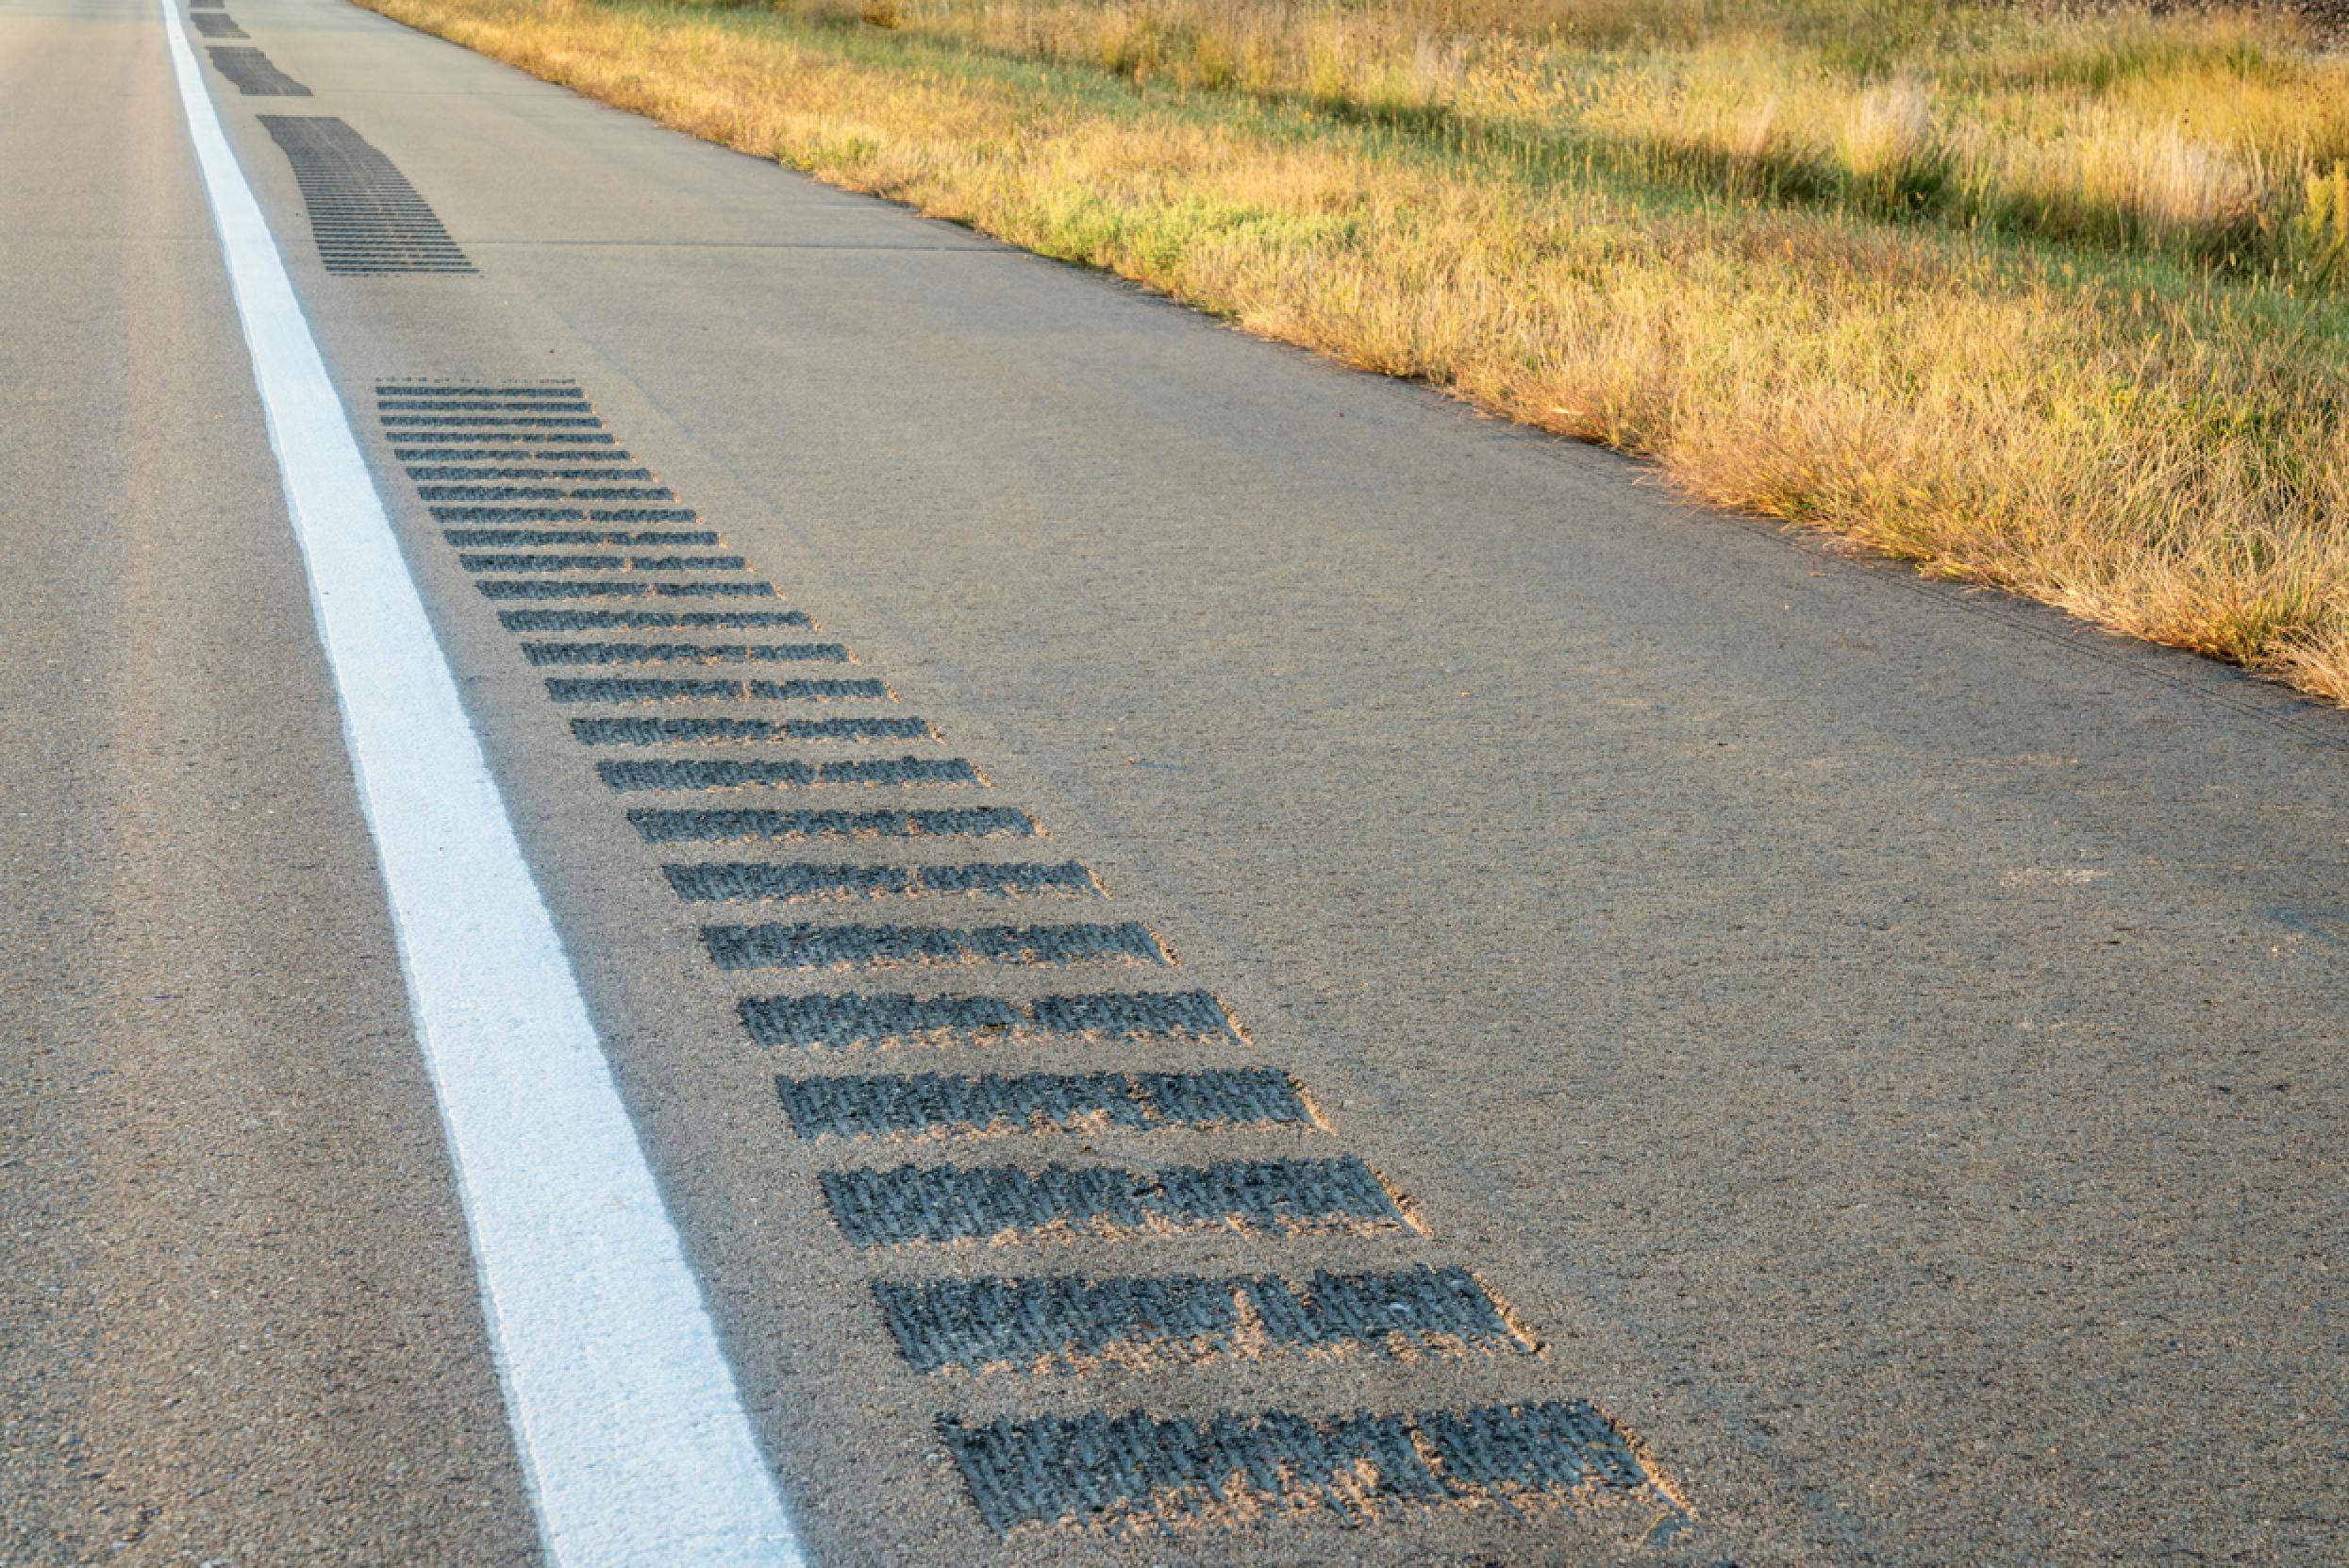 Image of road rumble strips